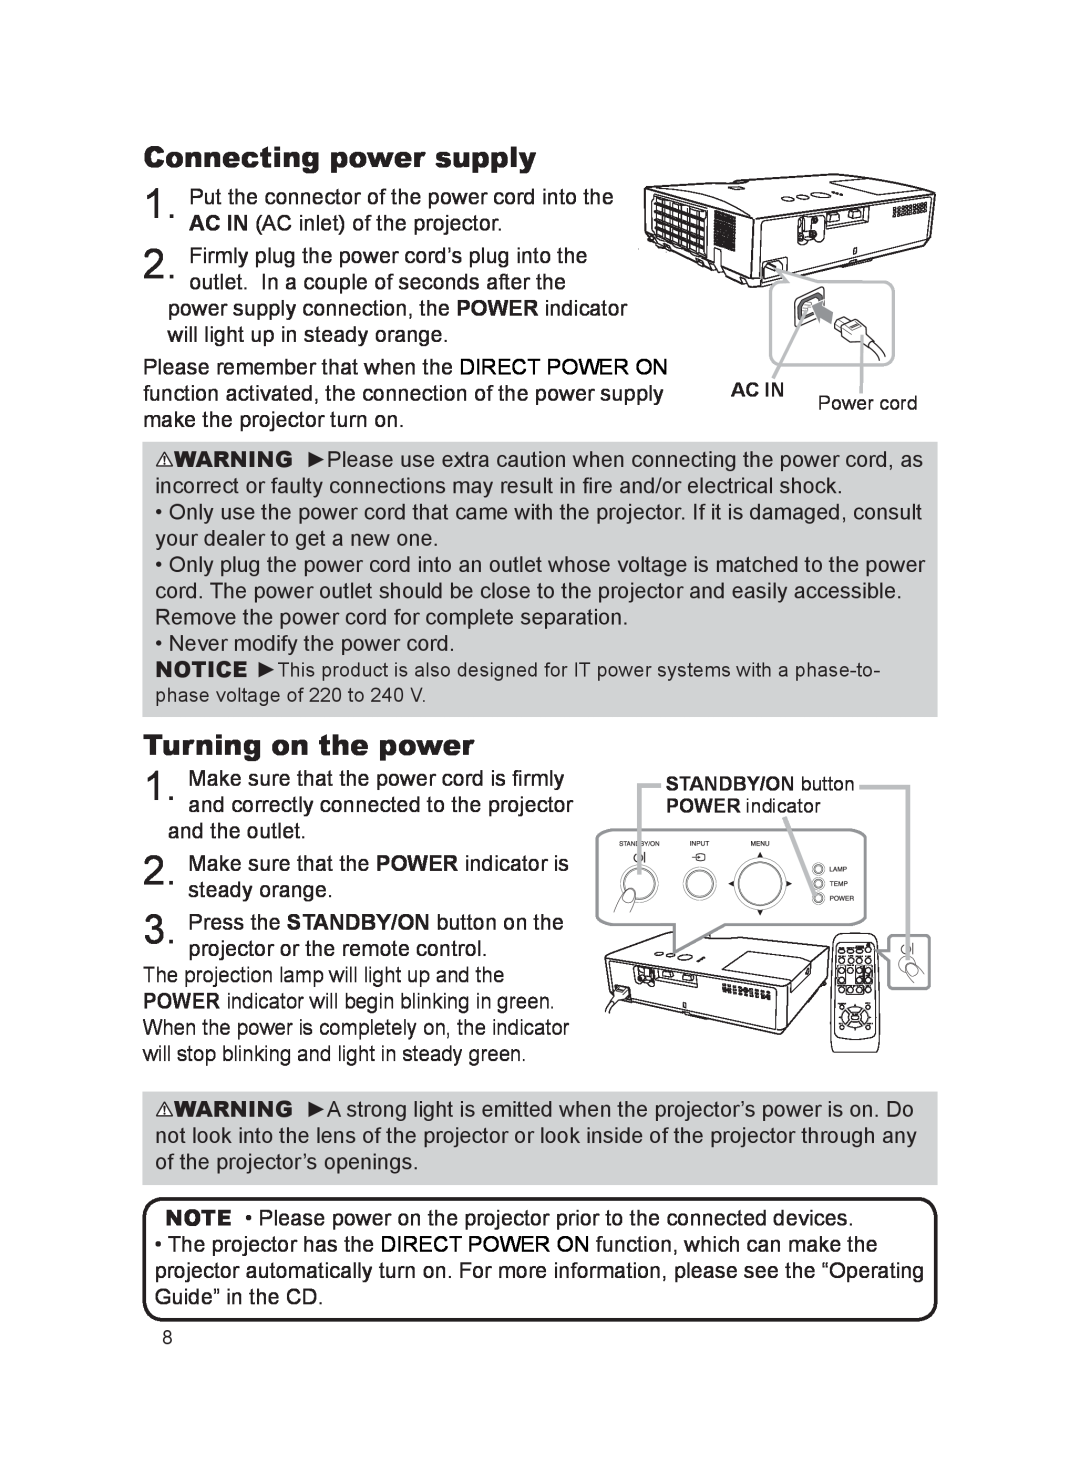 Dukane MODEL 8788 user manual Connecting power supply, Turning on the power 